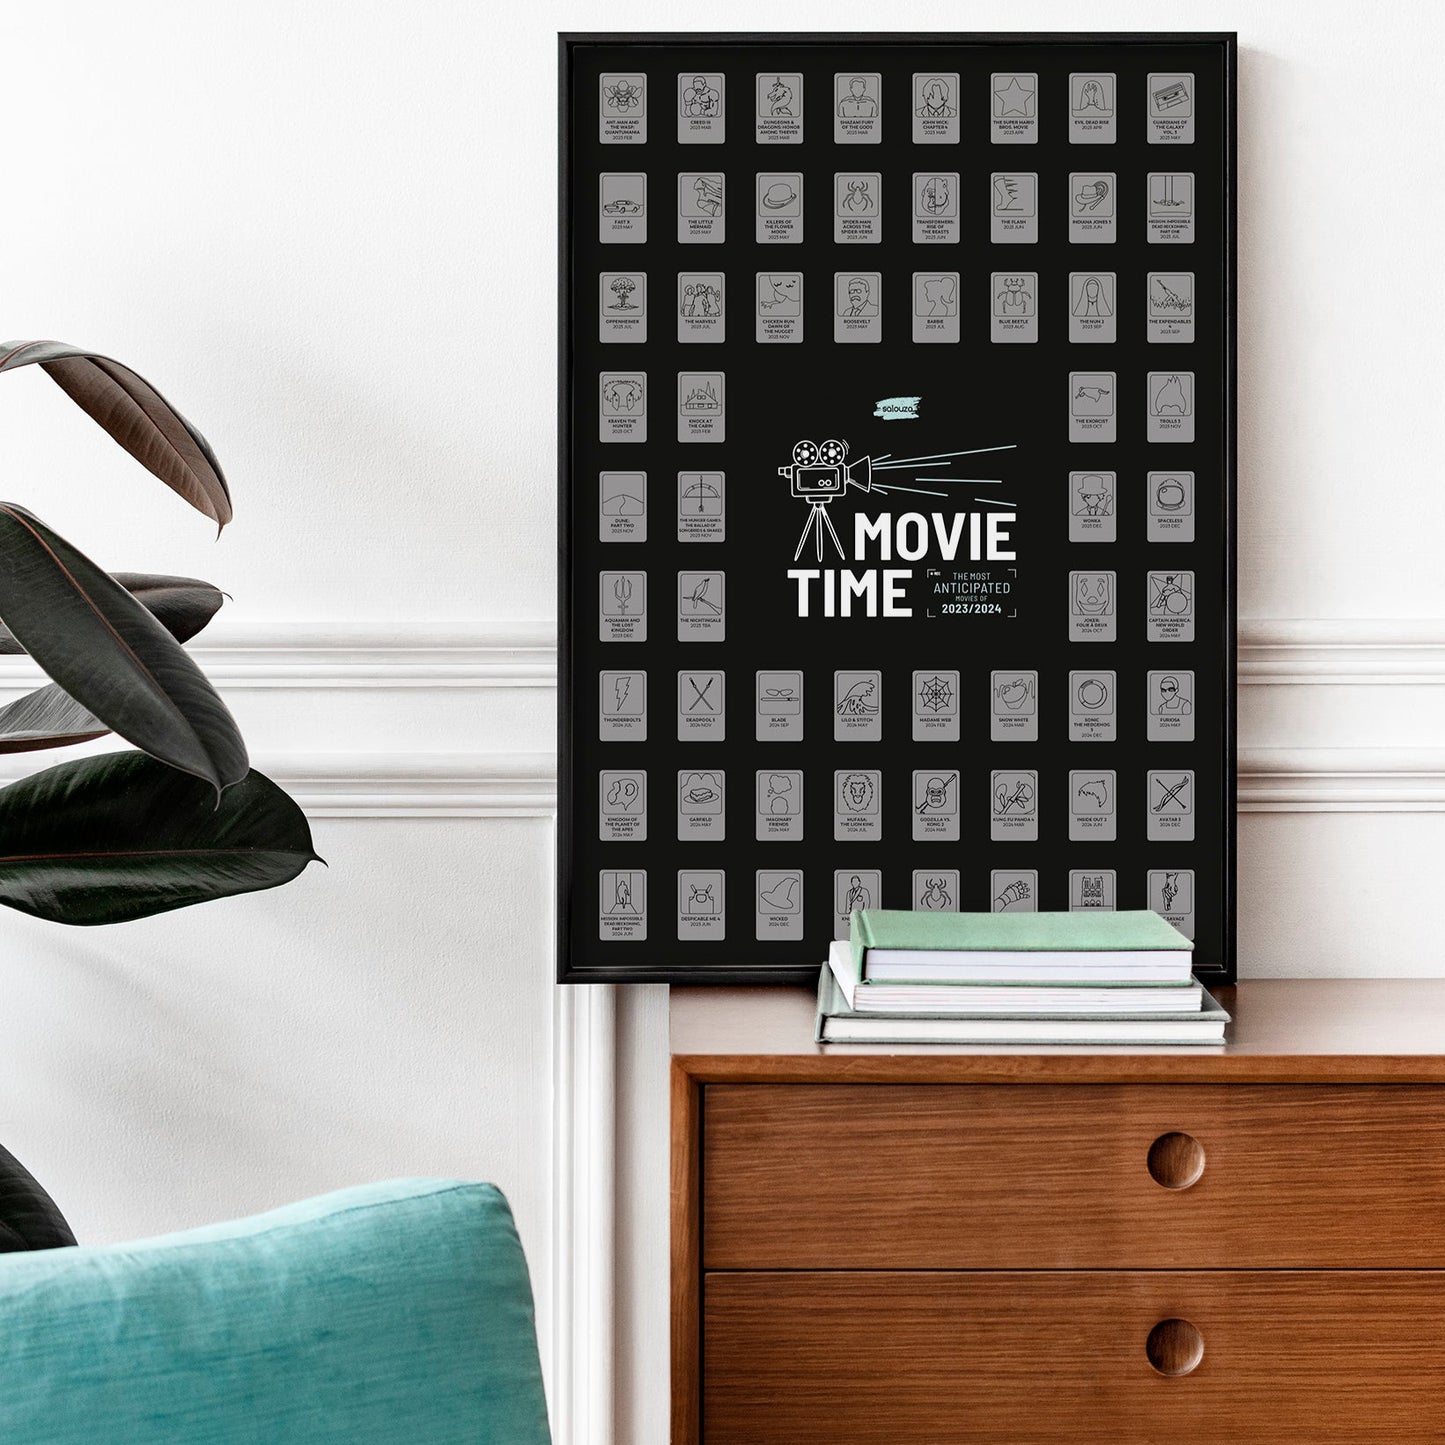 Scratch Off Cards and Poster set "Movies"